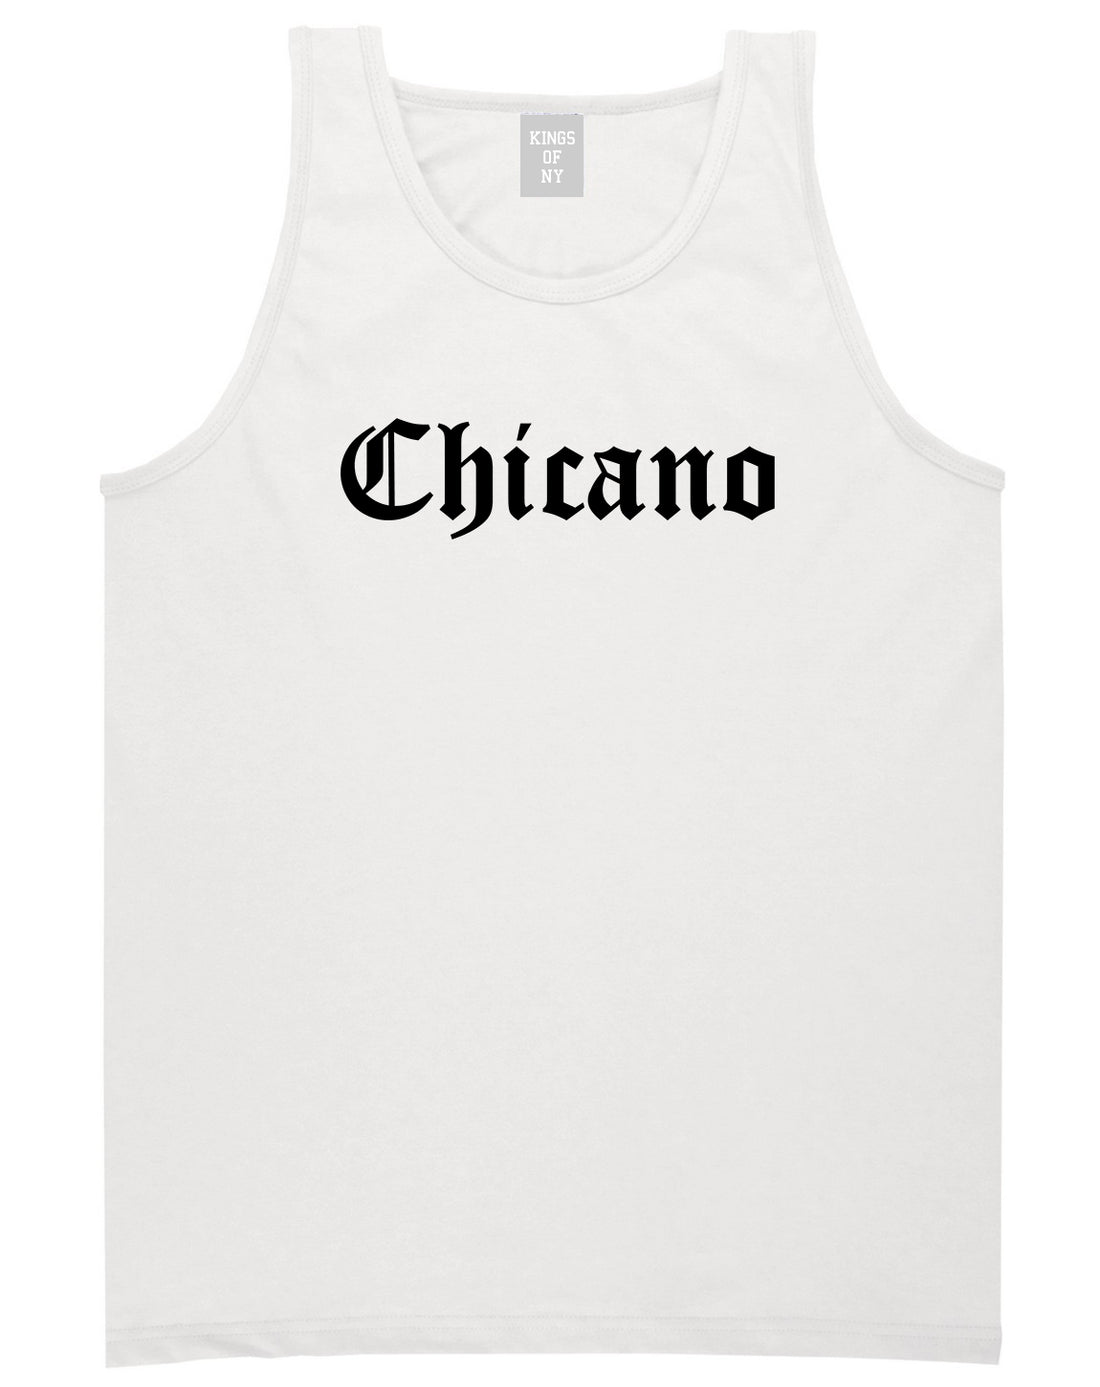 Chicano Mexican Mens Tank Top Shirt White